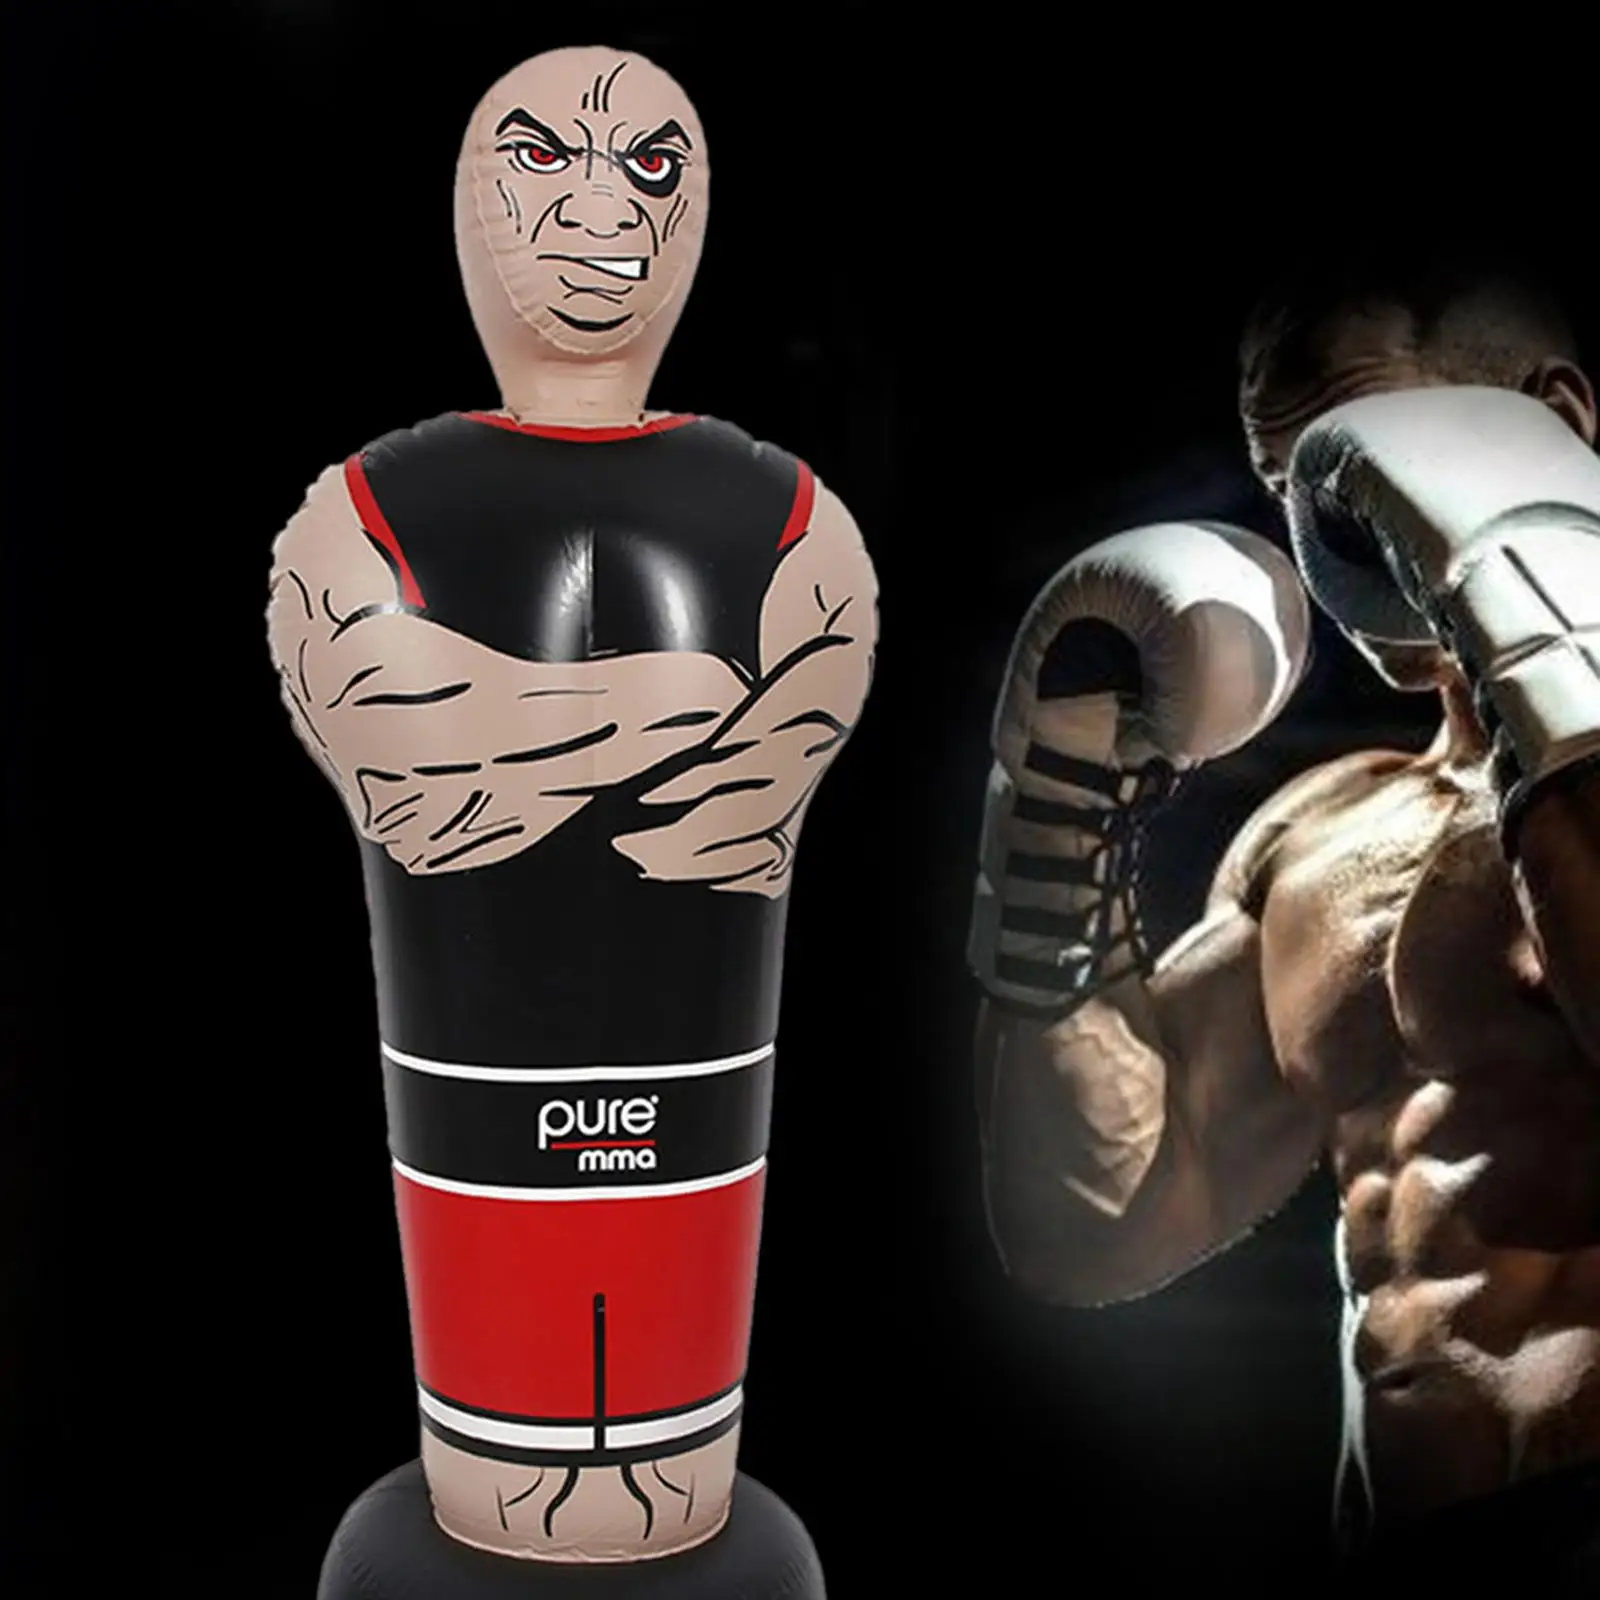 Inflatable Punching Bag Free Standing Boxing Dummy Sandbag for Kids Teens for Exercise Practicing Fitness Tool Workout Muay Thai